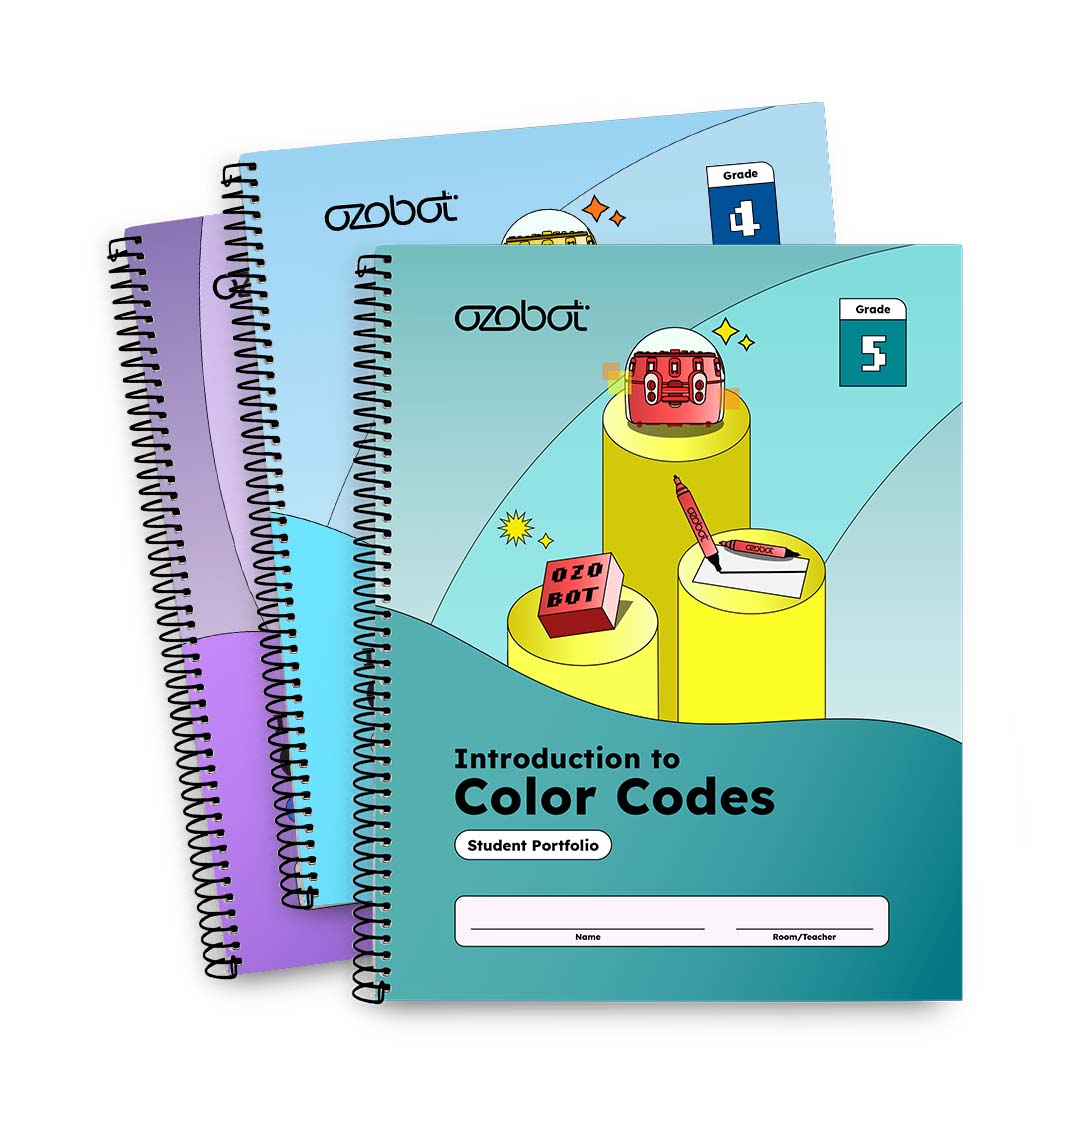 Introduction to Color Code student portfolio - stem activities for beginners